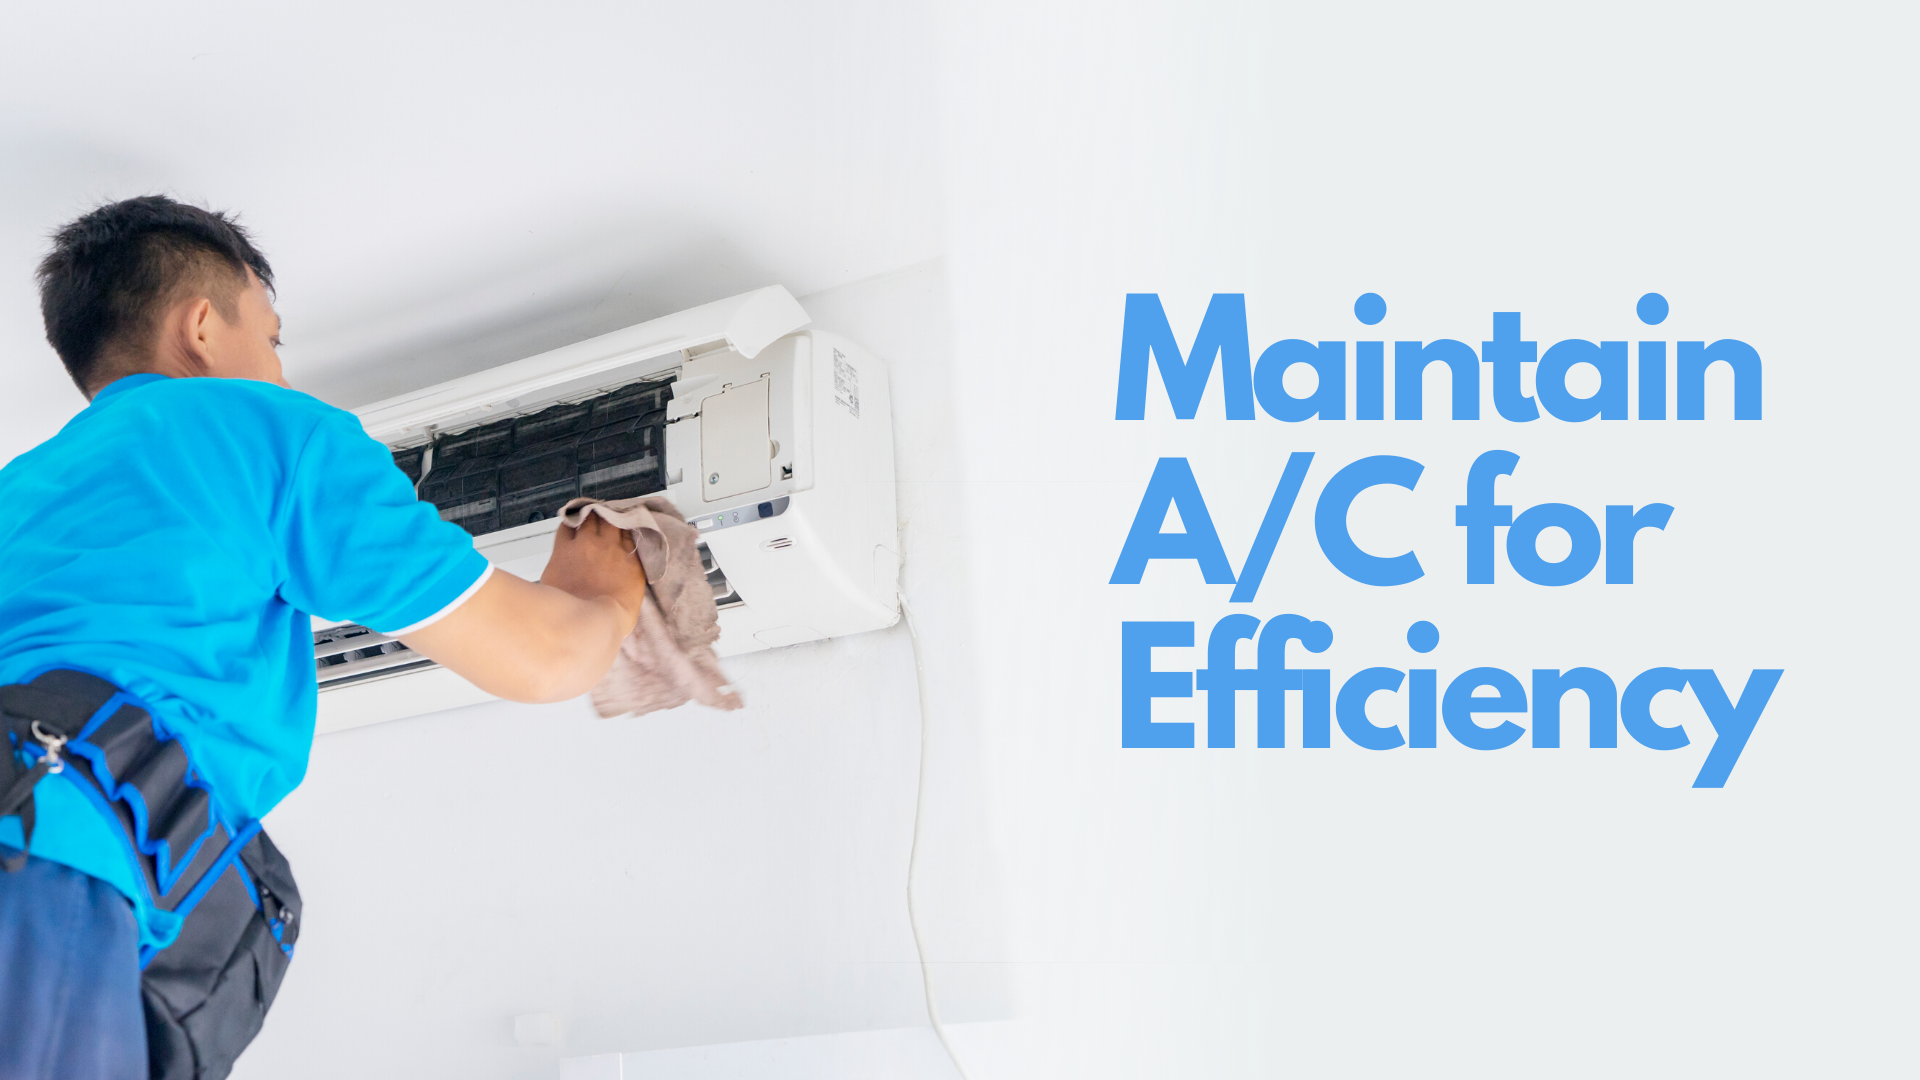 Maintain A/C for Efficiency